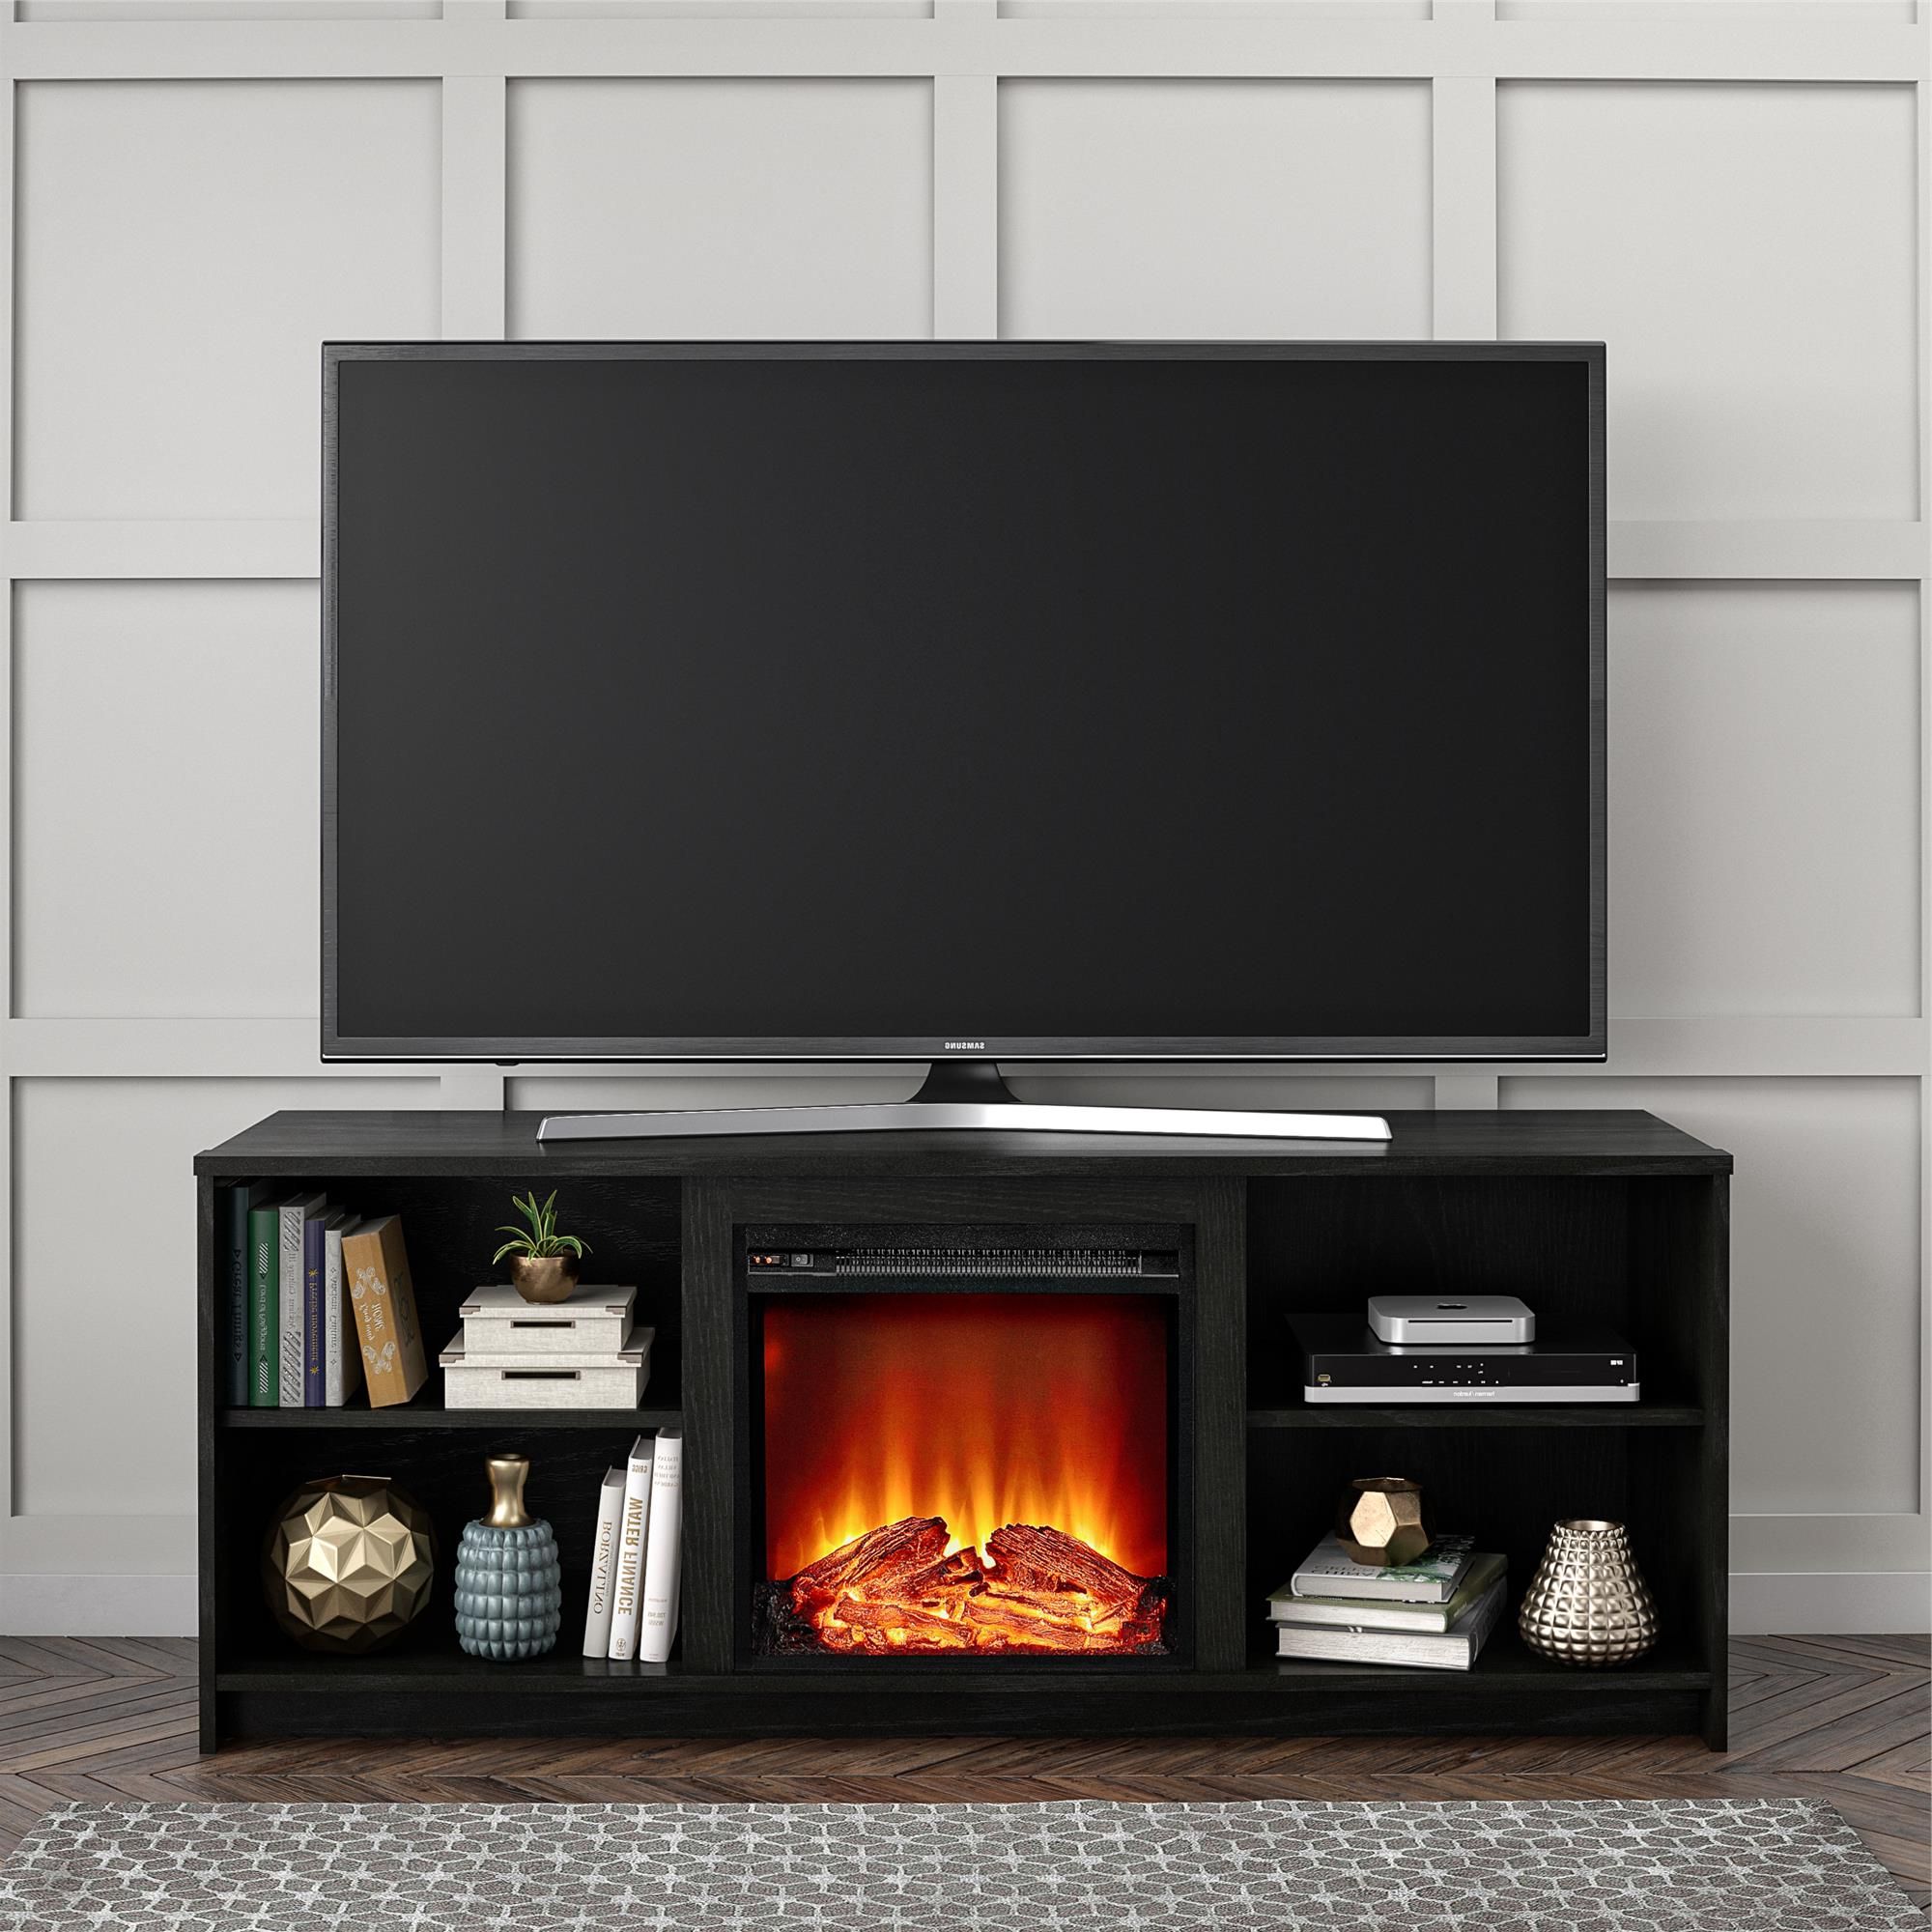 Recent Mainstays Fireplace Tv Stand For Tvs Up To 65", Black Oak Intended For Adalberto Tv Stands For Tvs Up To 65" (View 1 of 20)